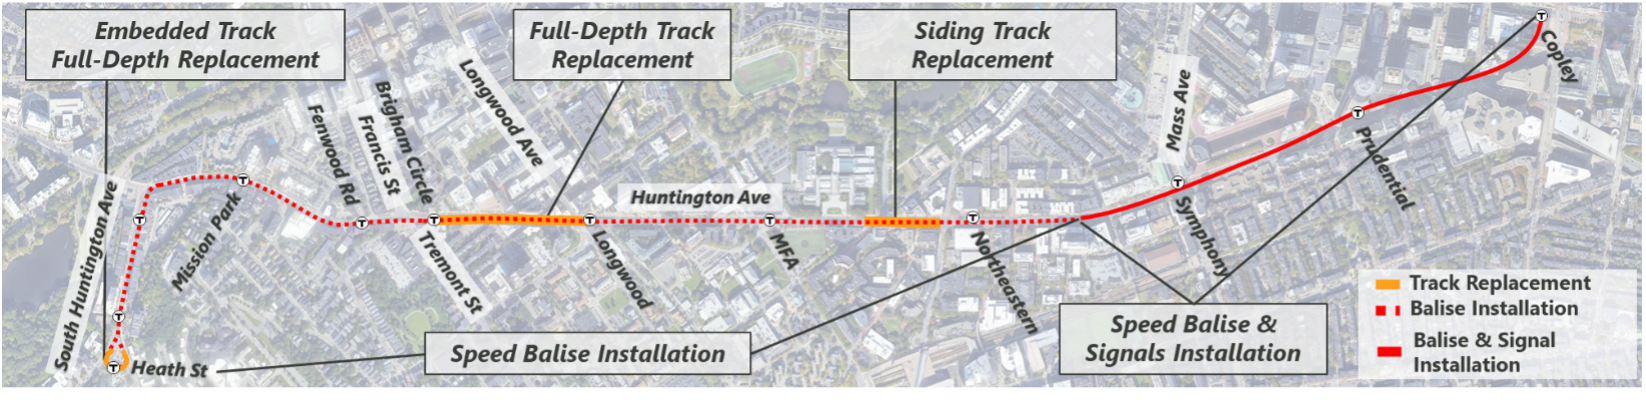 A diagram showing where certain work will take place on the E Branch: embedded track full-depth replacement and speed balise installation at Heath St, full depth track replacement between Tremont St and Longwood, siding track replacement between MFA and Northeastern, Speed balise and signal installation between Mass Ave and Northeastern and at Copley station